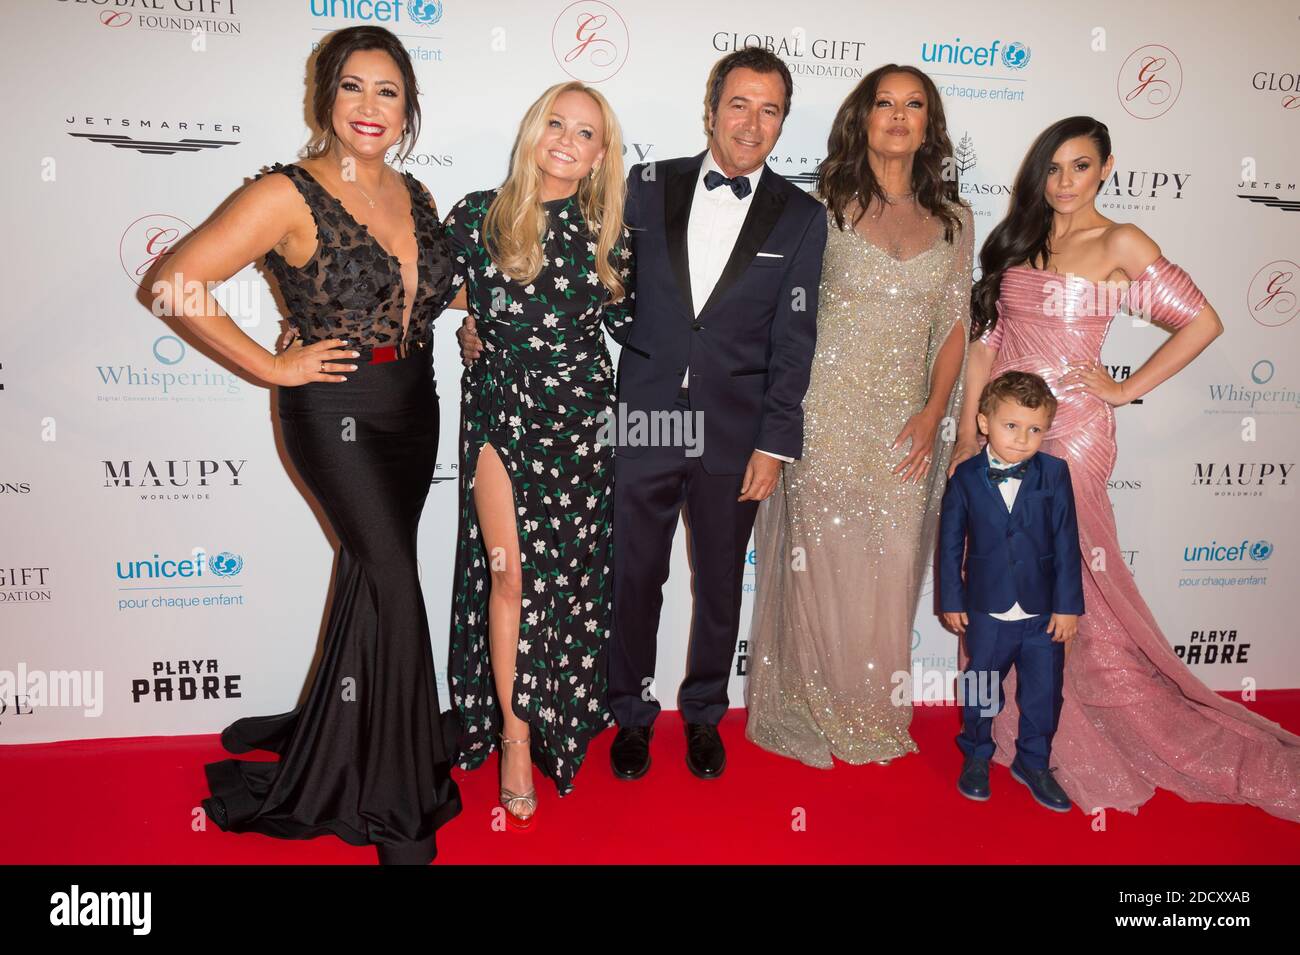 Emma Bunton, Vanessa Lynn Williams, Maria Bravo, Bernard Montiel and Guest attending the Global Gift Gala in aid of Unicef France and Global Gift Foundation at Seasons Hotel George V in Paris, France on april 25, 2018 . Photo by Nicolas Genin/ABACAPRESS.COM Stock Photo